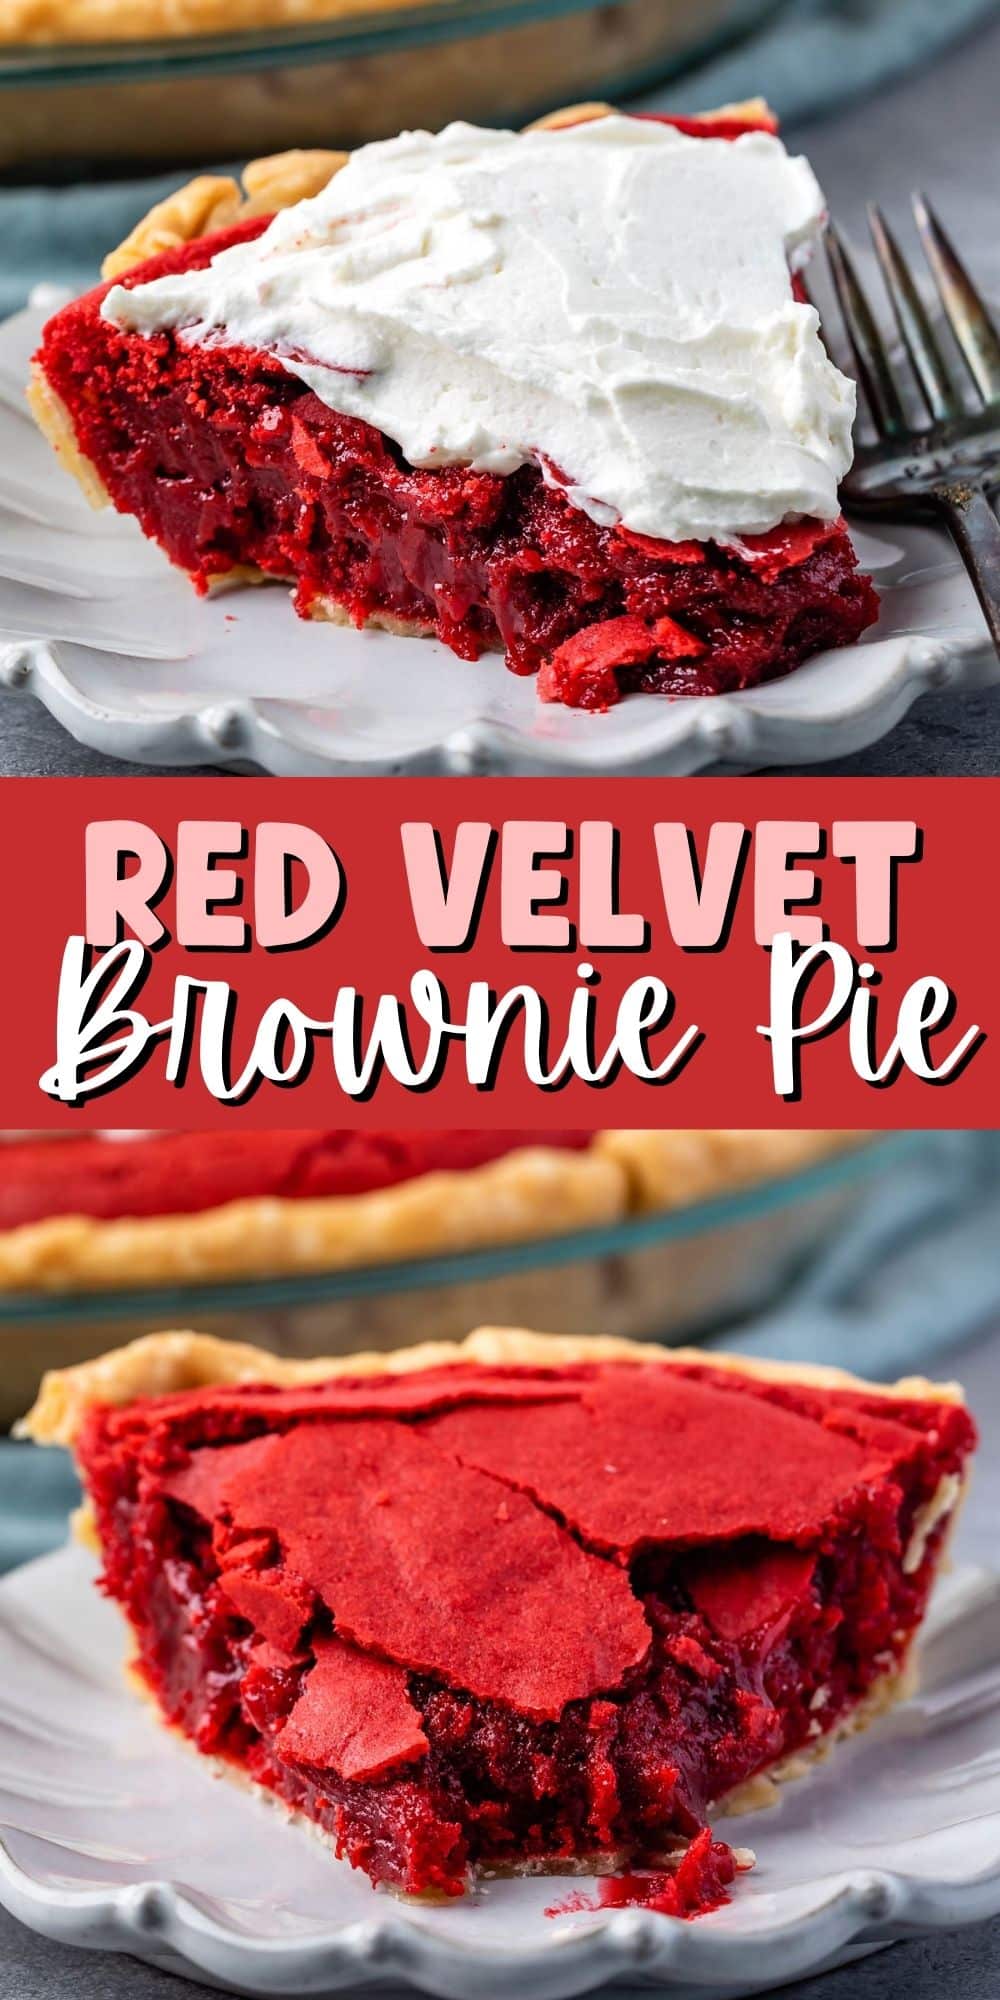 two photos of one slice of red velvet pie on top on a grey plate with words on the image